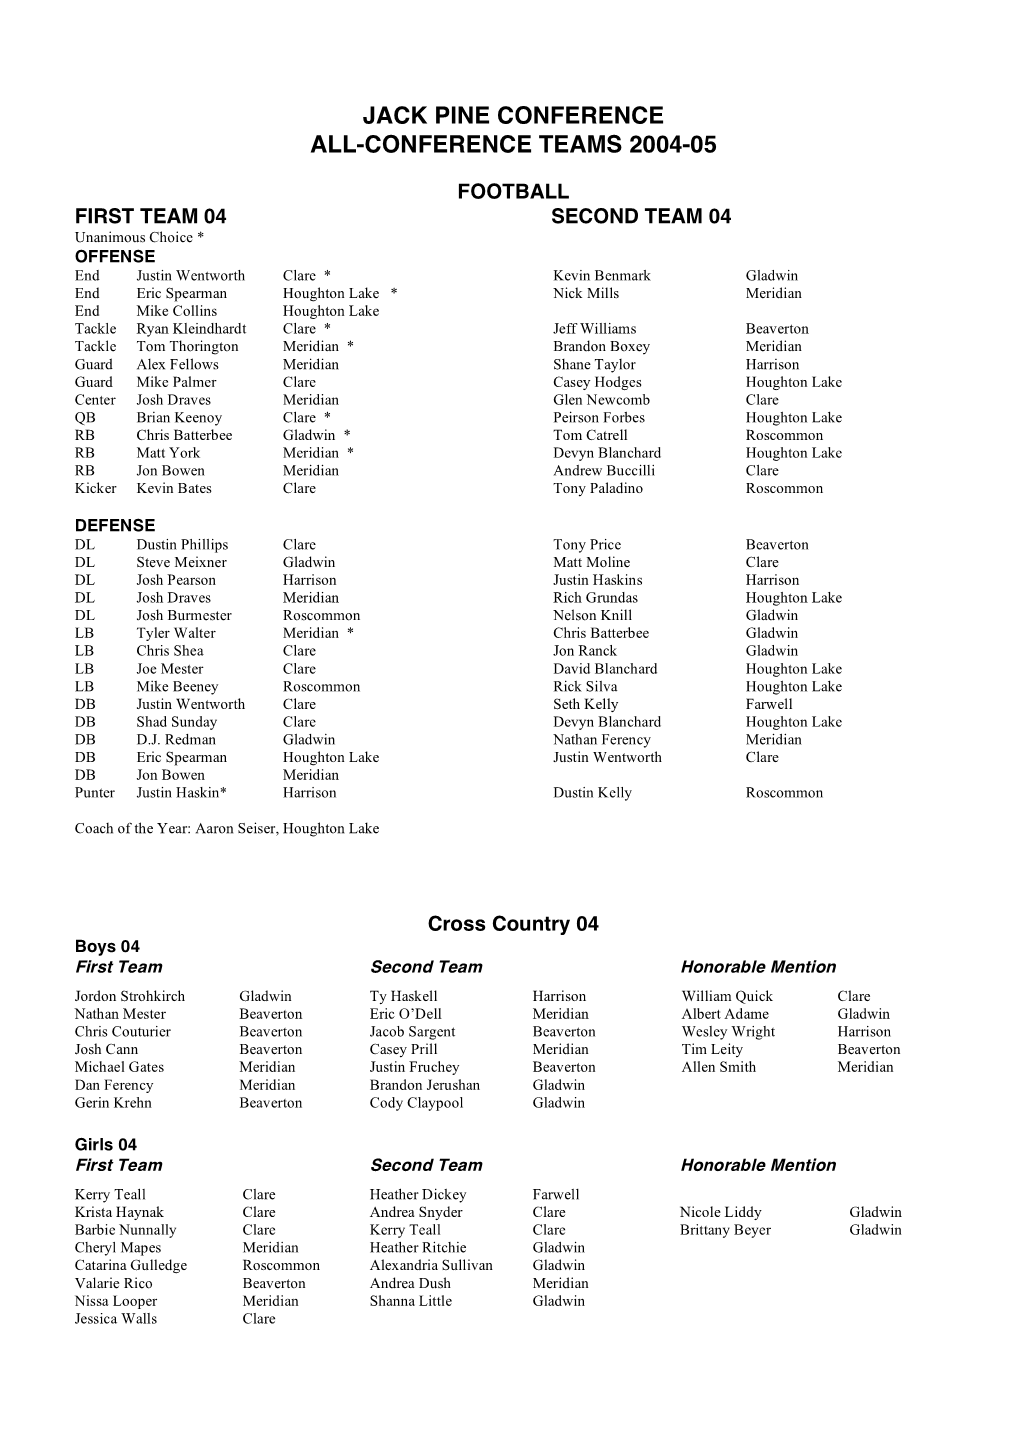 Jack Pine Conference All-Conference Teams 2004-05